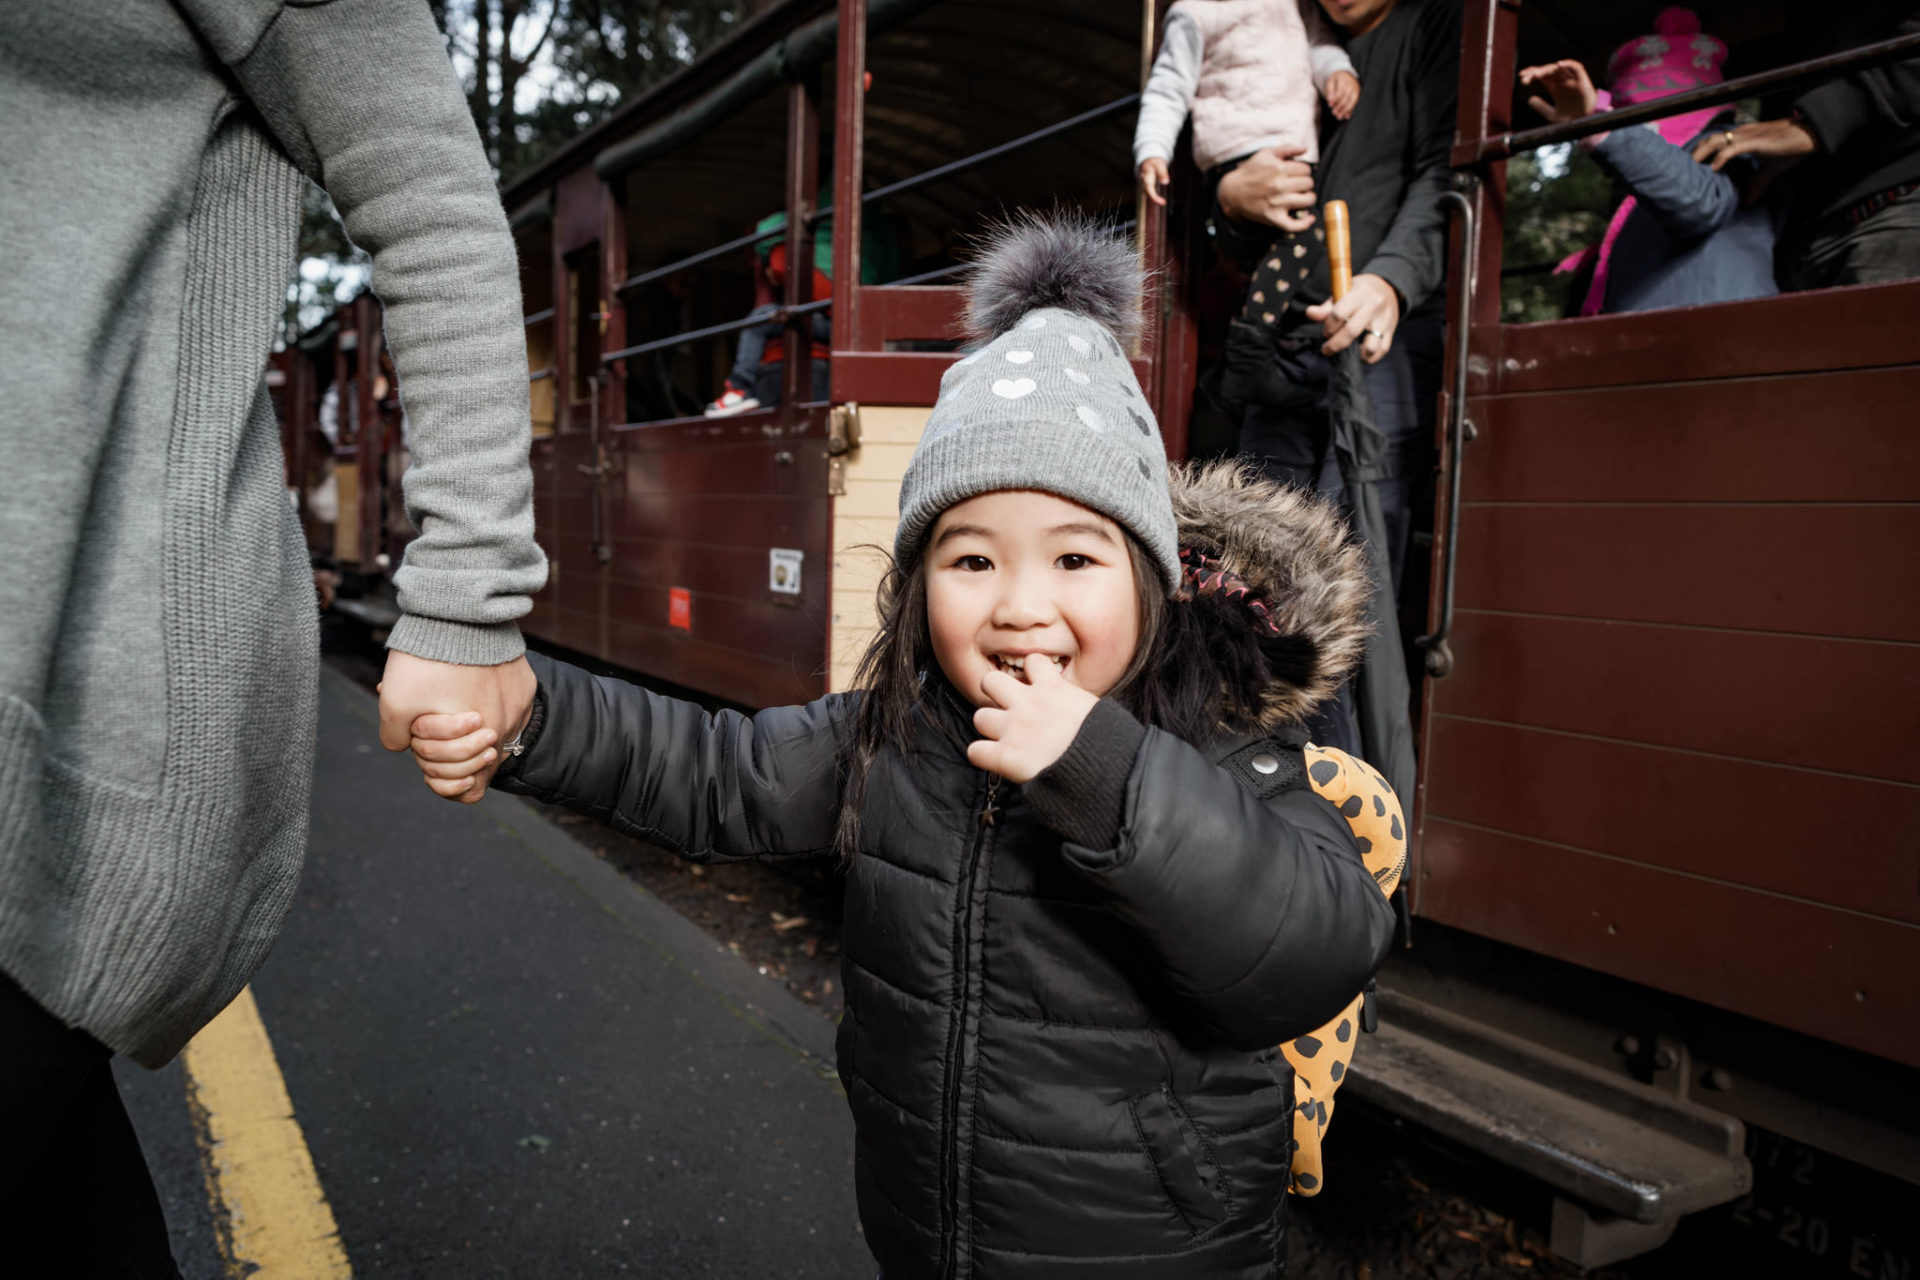 Young girl in winter clothes at Puffing Billy Railway's platform. She is holding the hand of a guardian and the train carriage can be seen in the background.